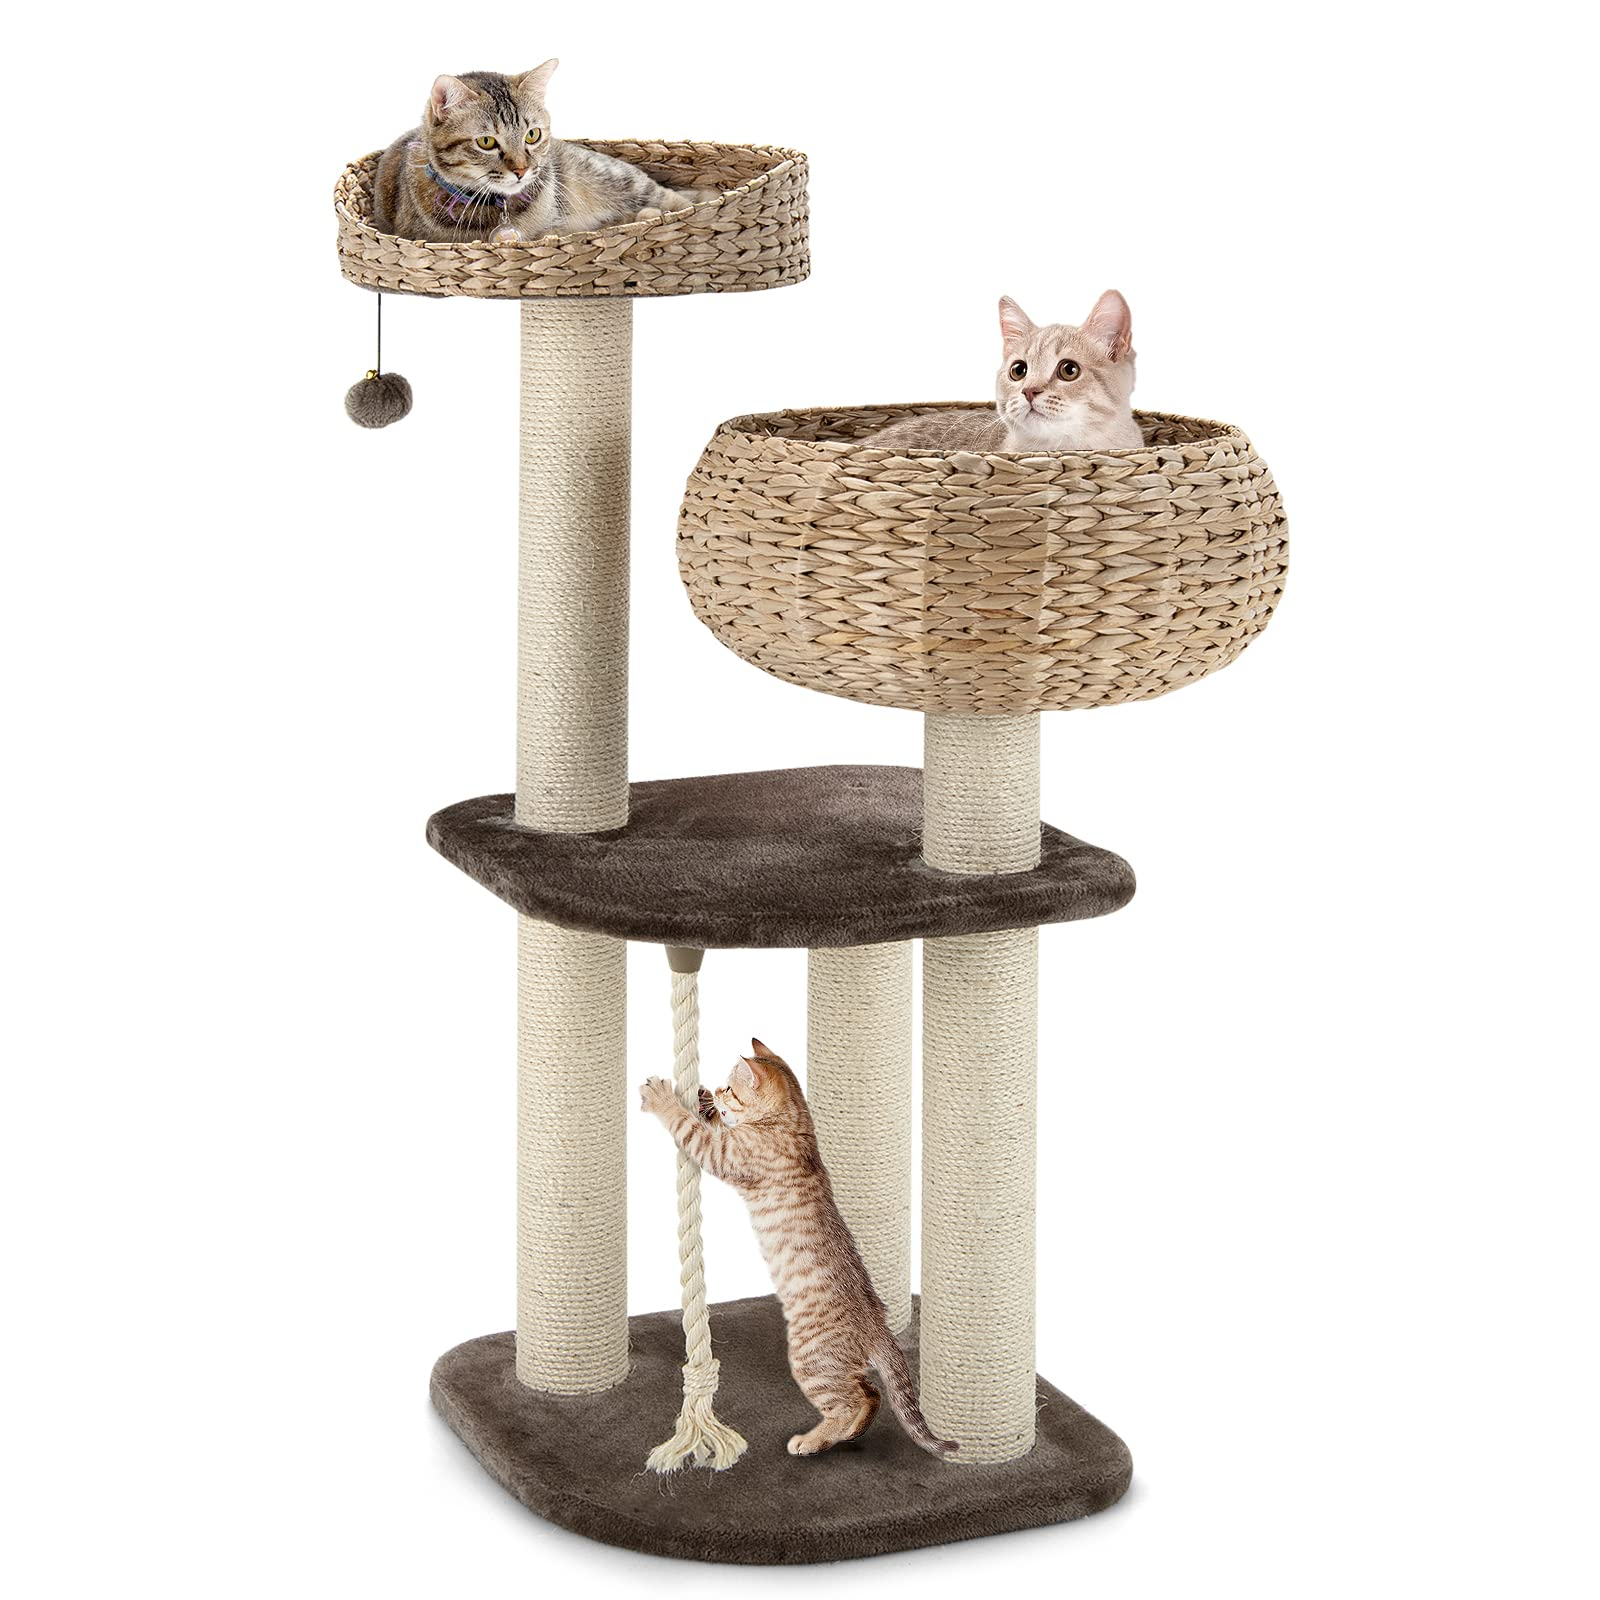 Tangkula Modern Cat Tree for Indoor Cats, 41 Inch Tall Cat Tree with Hand-Made Wicker Cat Condo & Top Perch for Large Cats